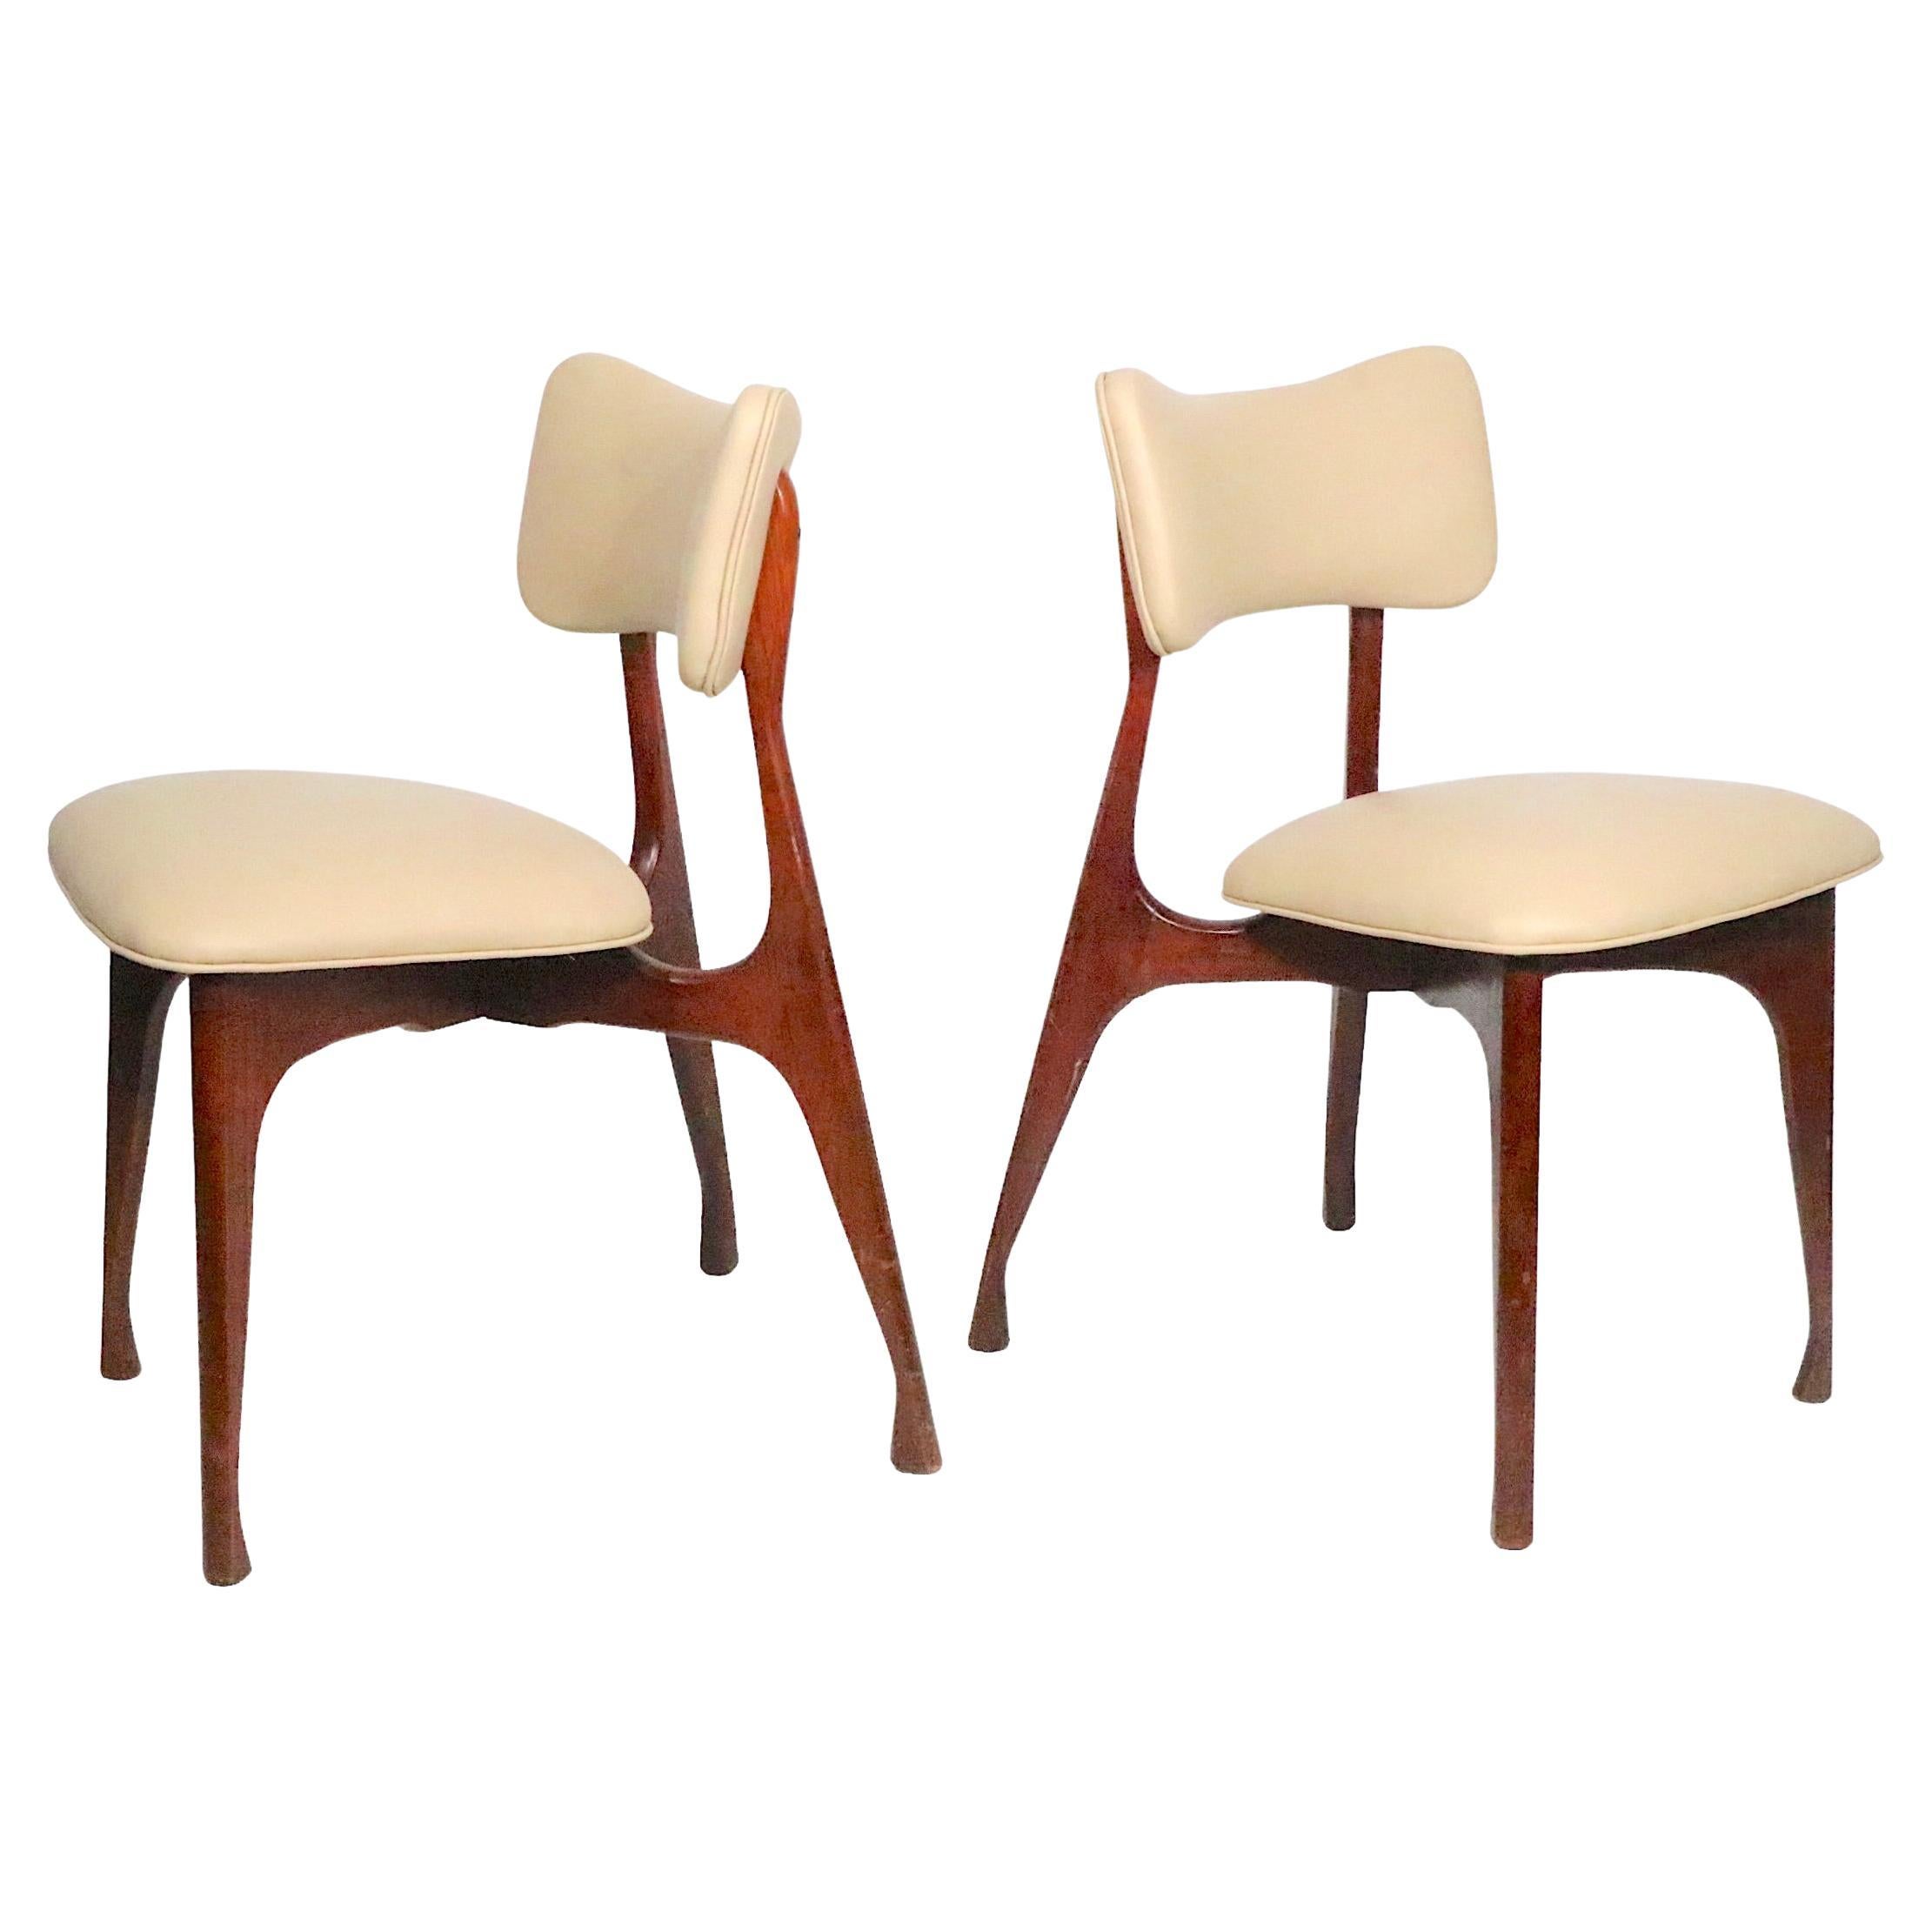 Pr. Midcentury Dining Side Chairs Att. to Ico Parisi, circa 1950s For Sale